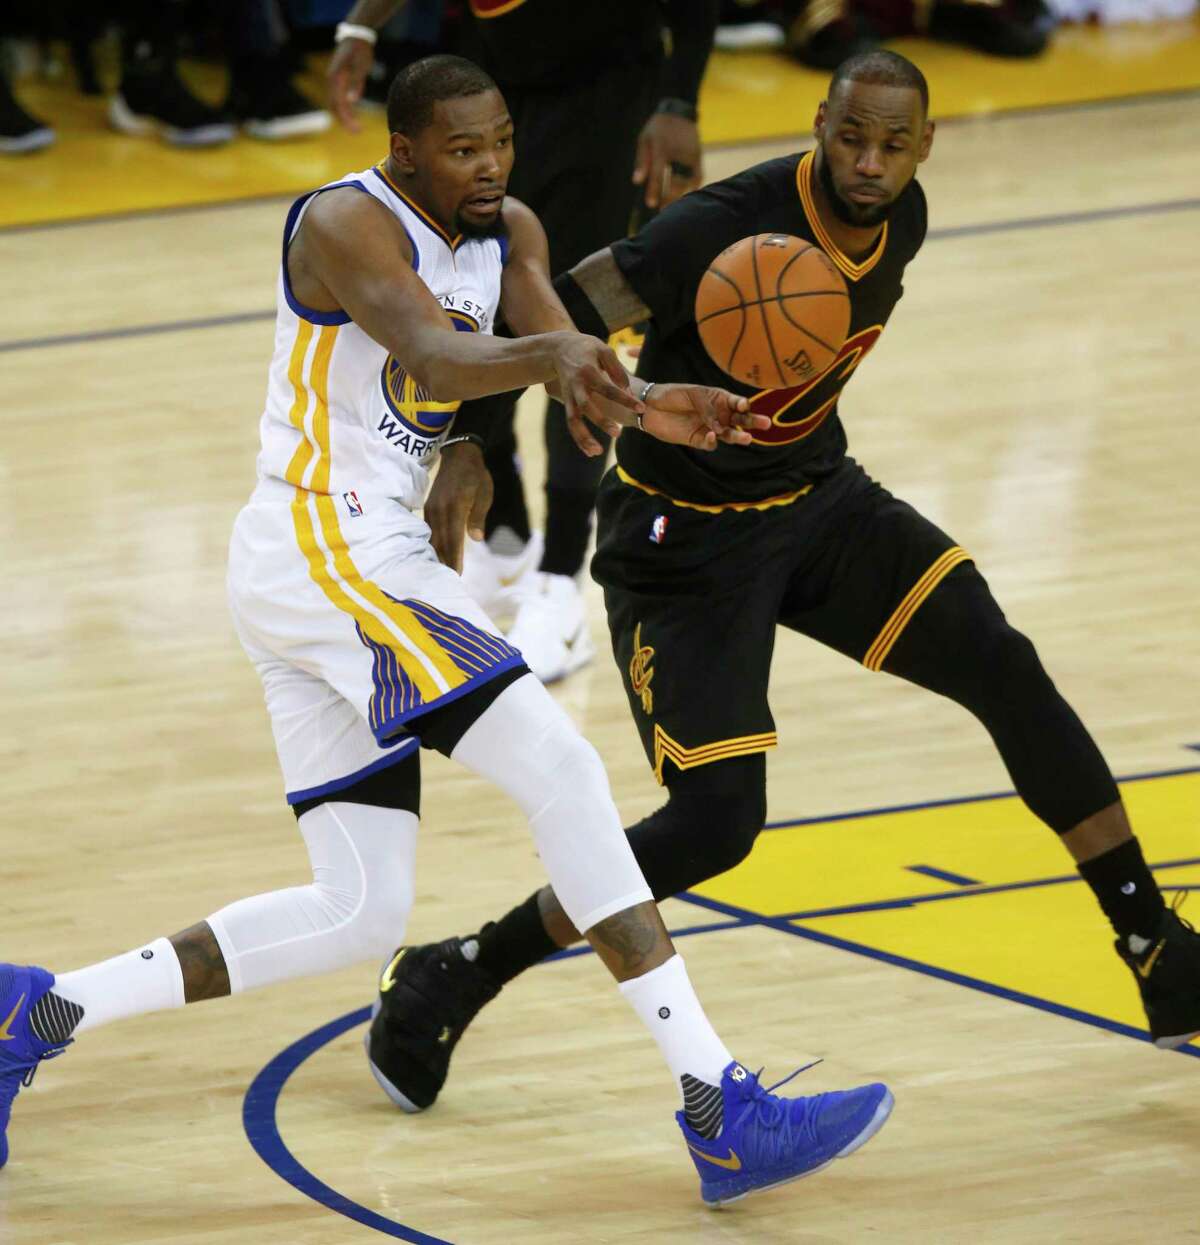 Golden State Warriors' Kevin Durant (35) passes the ball against Cleveland Cavaliers' LeBron James (23) in the fourth quarter of Game 2 of the NBA Finals on Sunday, June 4, 2017 at Oracle Arena in Oakland, Calif. (Nhat V. Meyer/Bay Area News Group/TNS)